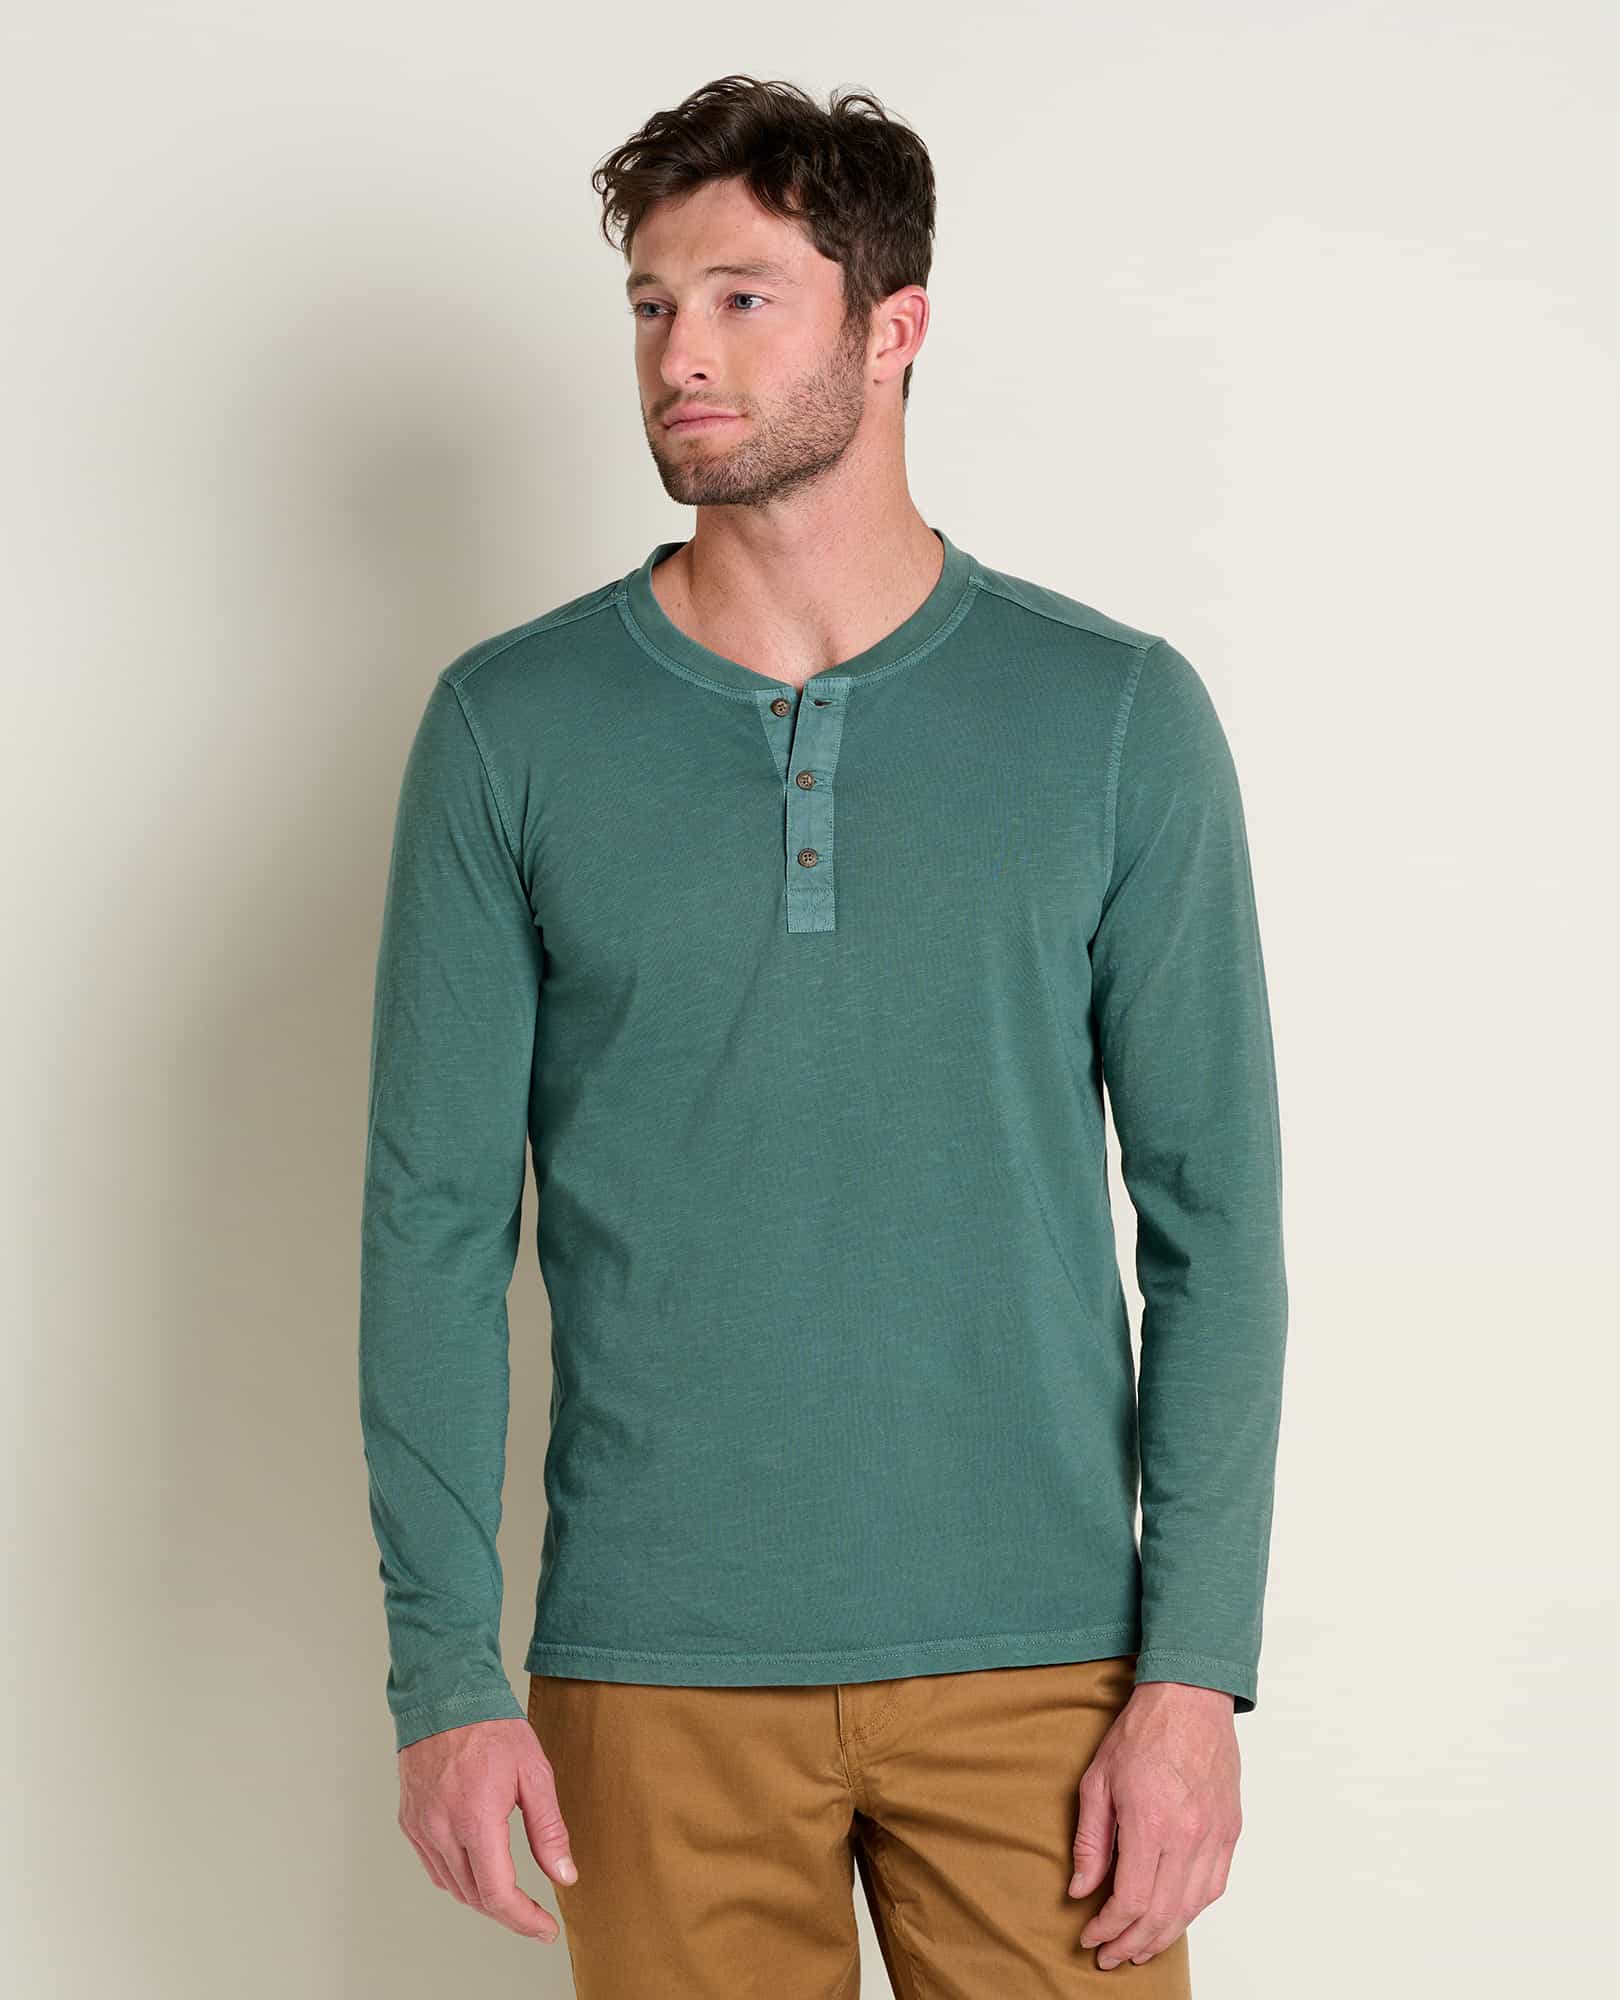 Men's Primo Long Sleeve Henley | Organic Cotton Shirt by Toad&Co